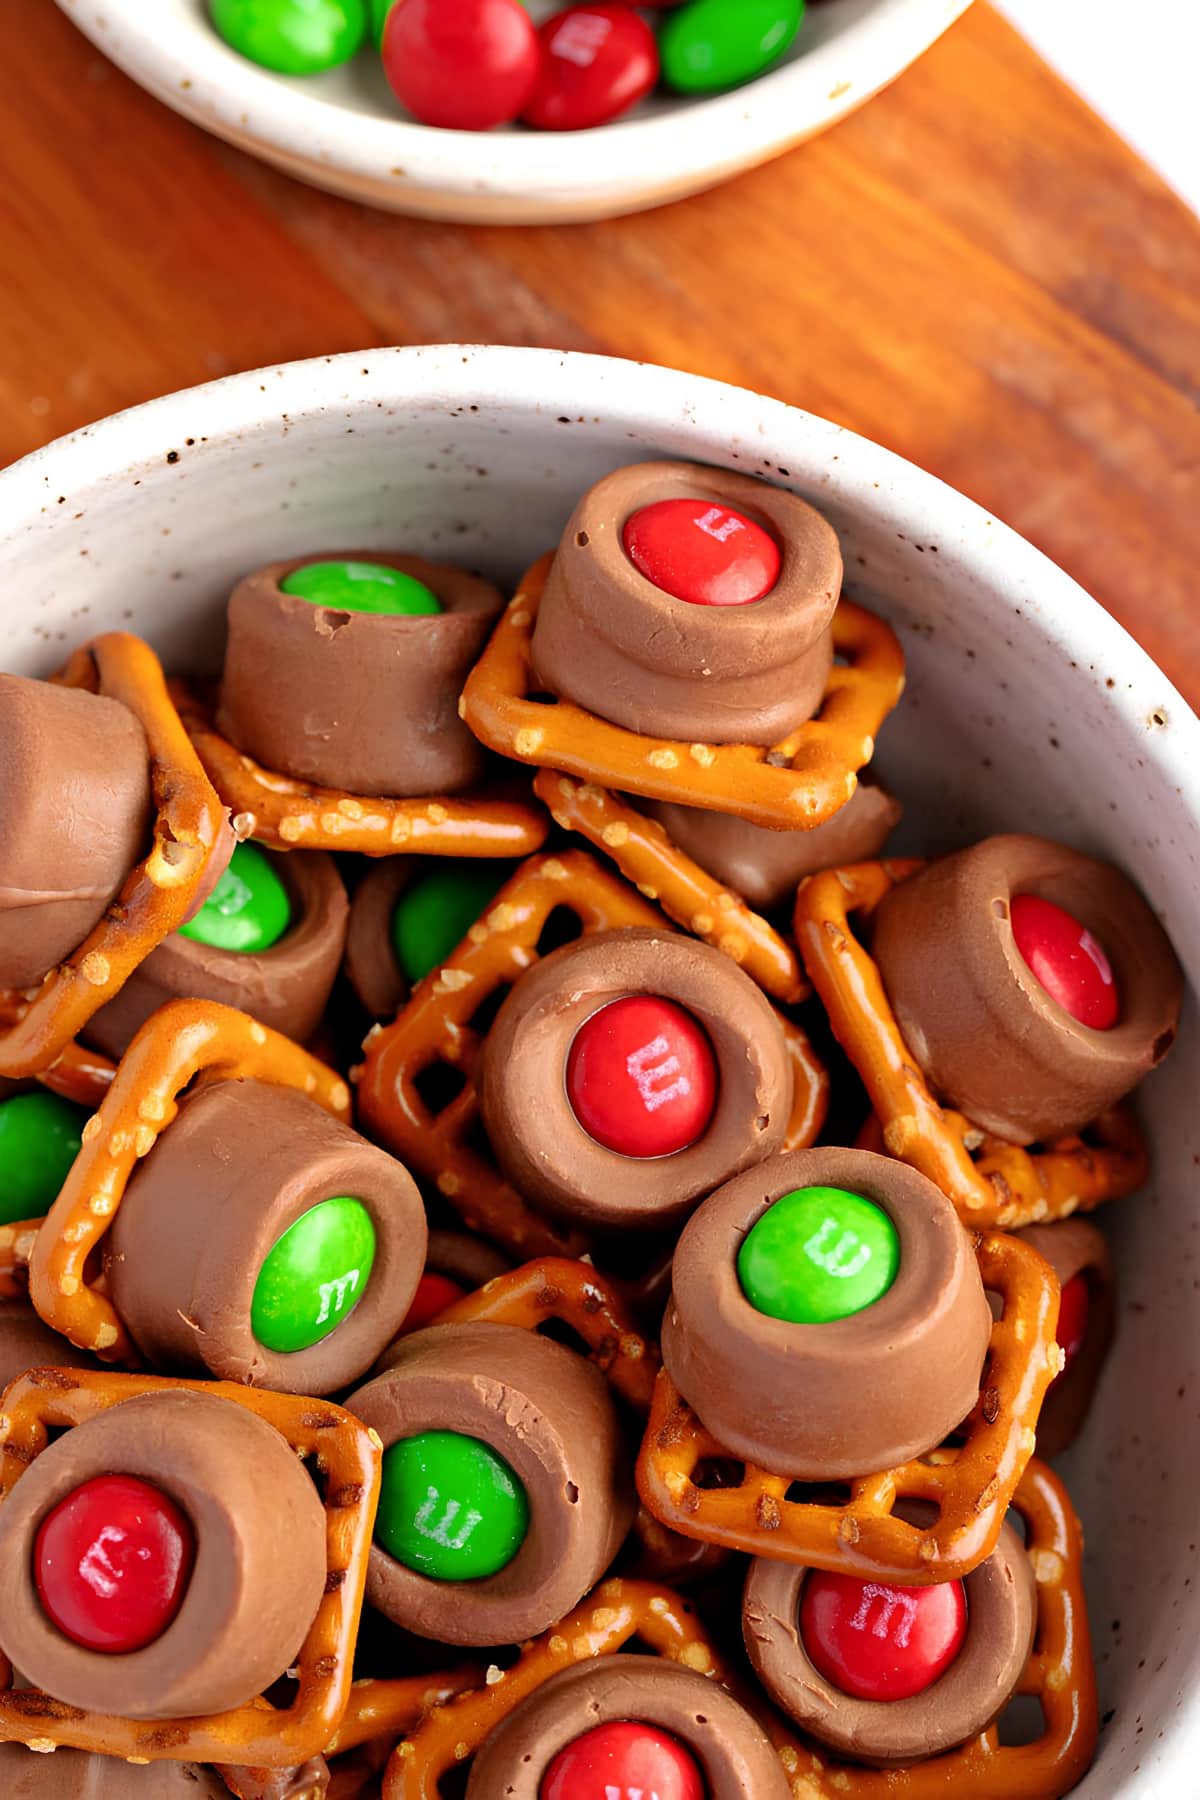 A bowl of chocolate pretzels topped with colorful M&M's, a delightful treat for any occasion